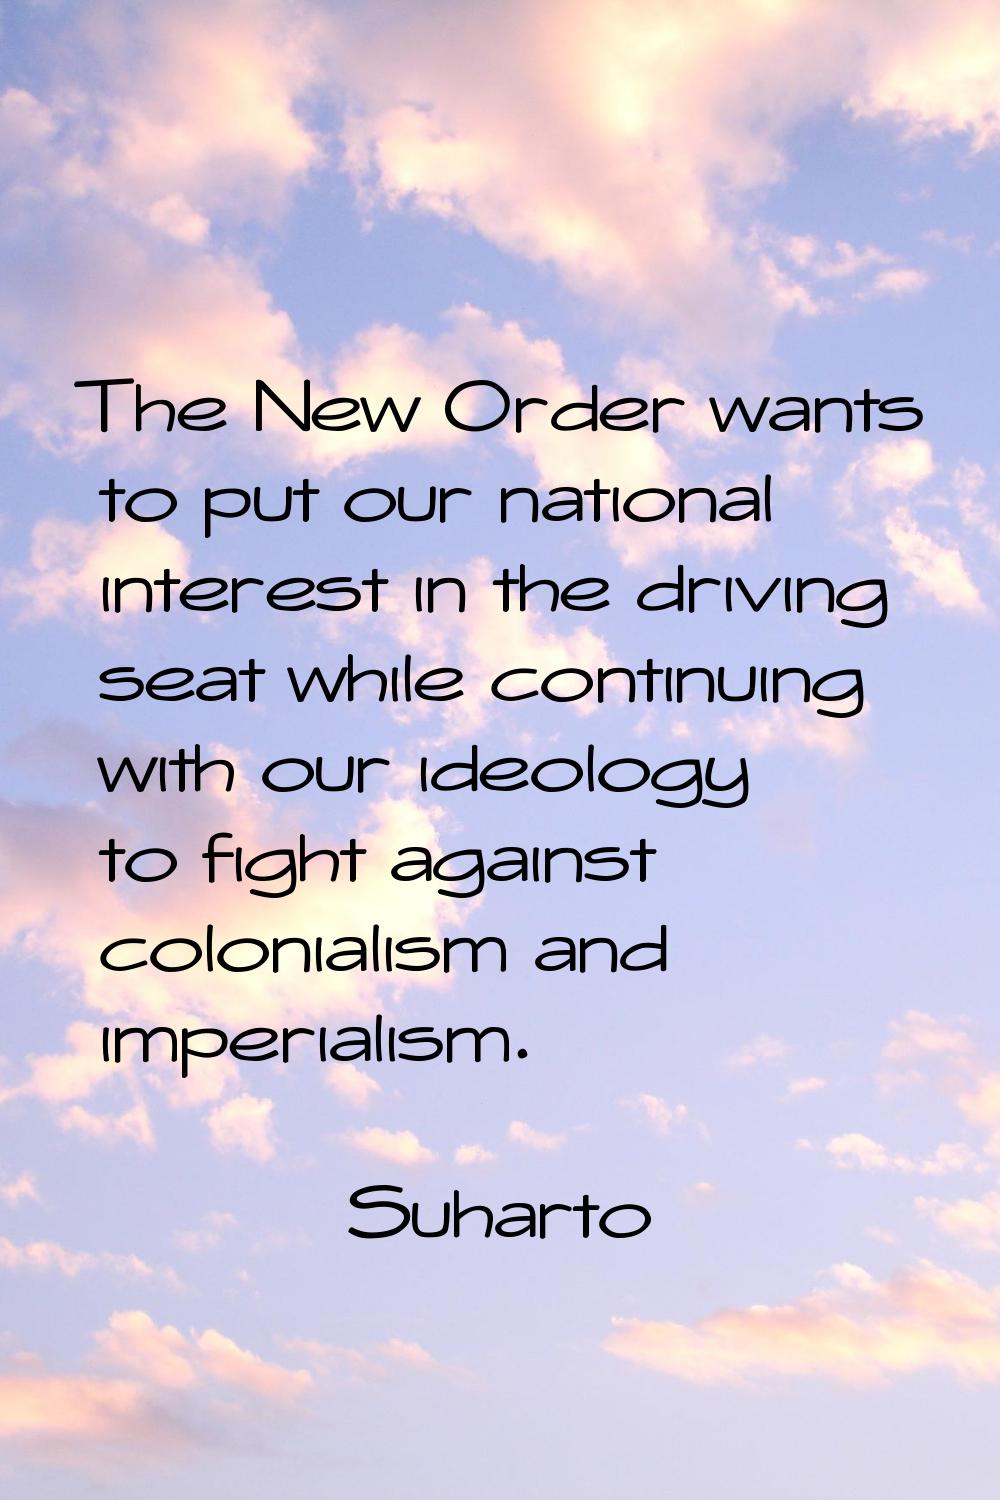 The New Order wants to put our national interest in the driving seat while continuing with our ideo